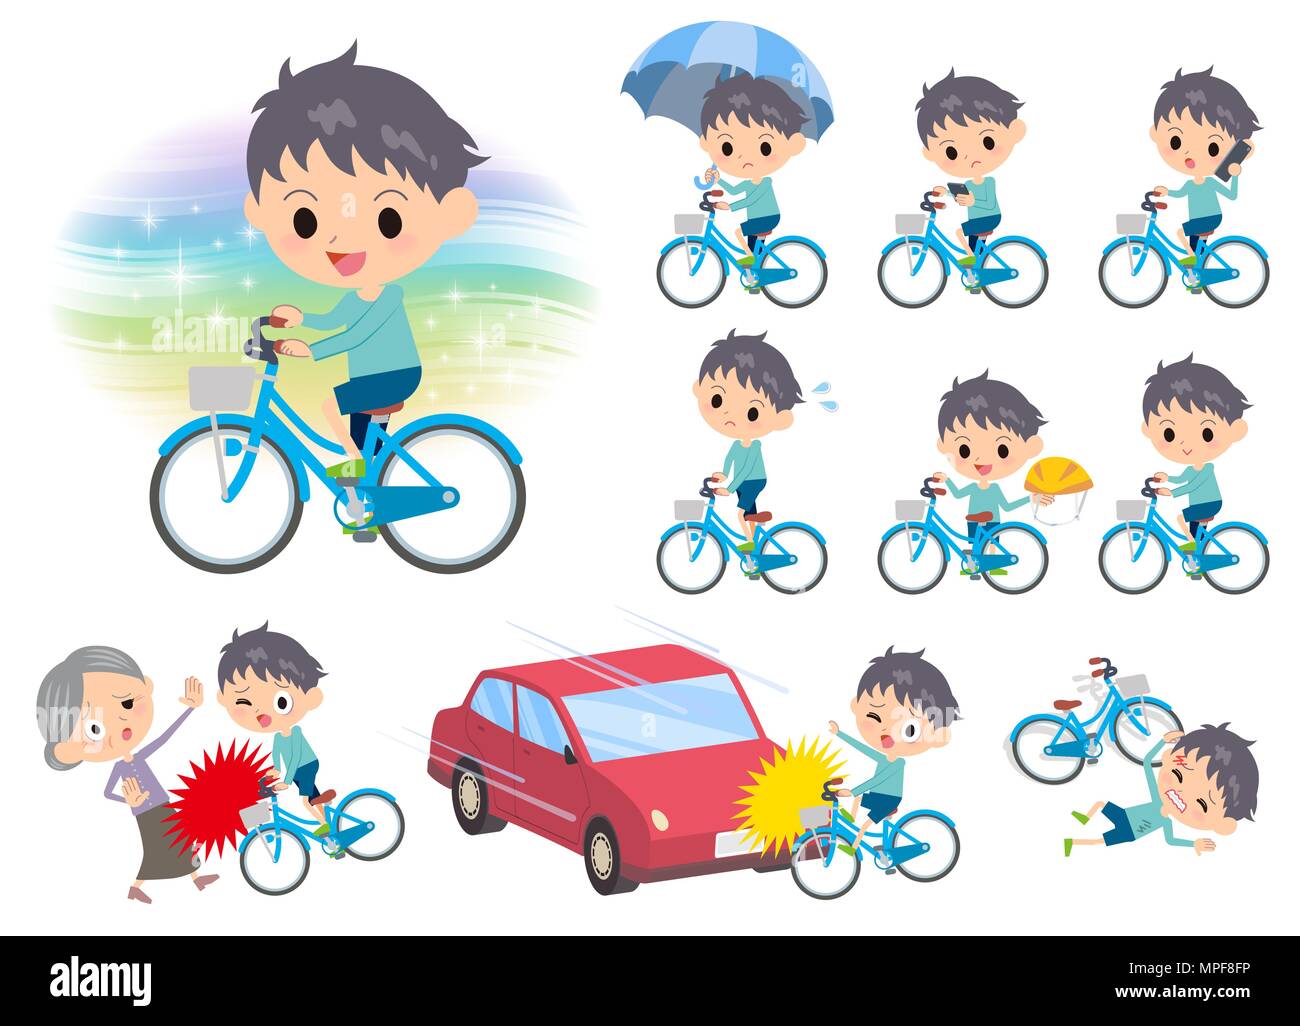 Set of various poses of blue clothing boy ride on city bicycle Stock ...